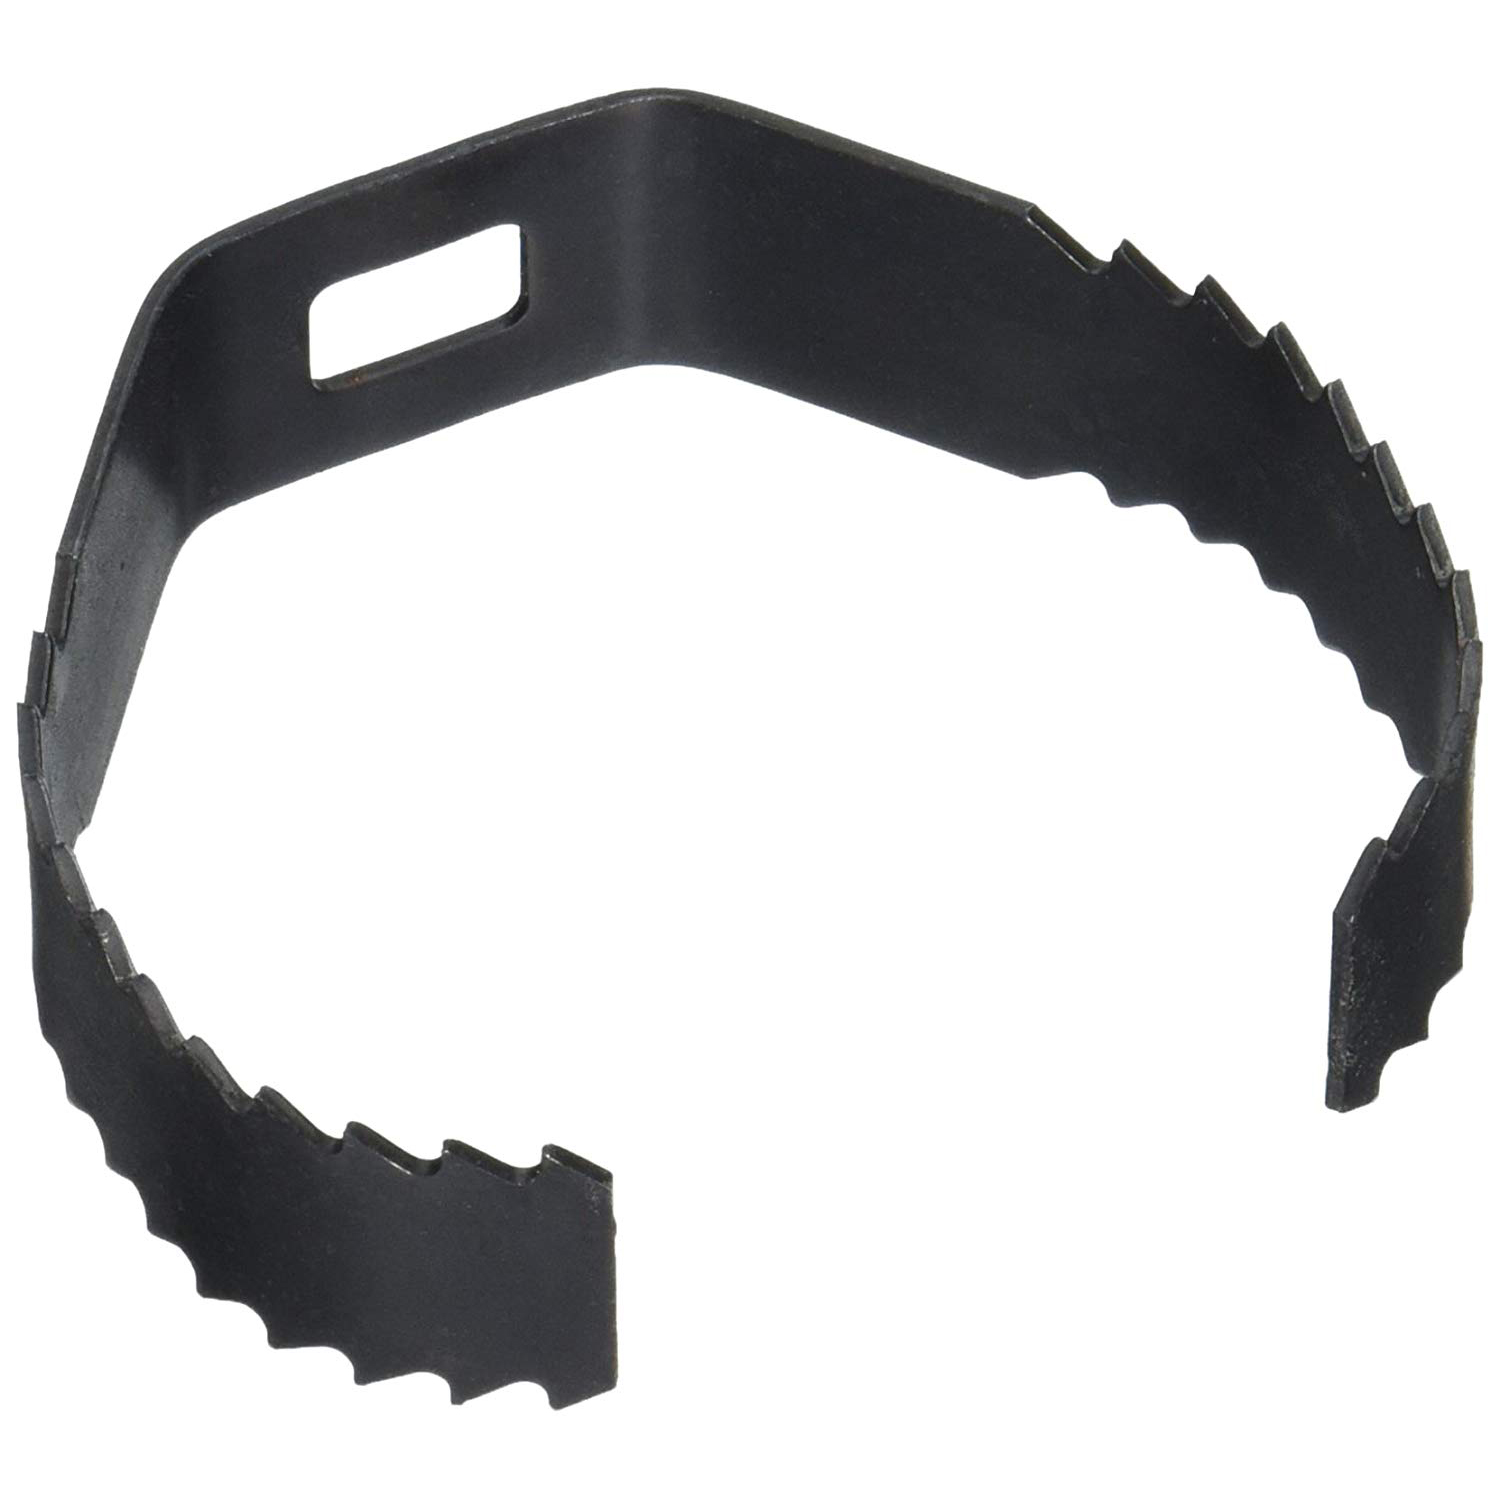 BLADE 4 98010 REPLACEMENT FOR T-150-2 CUTTER